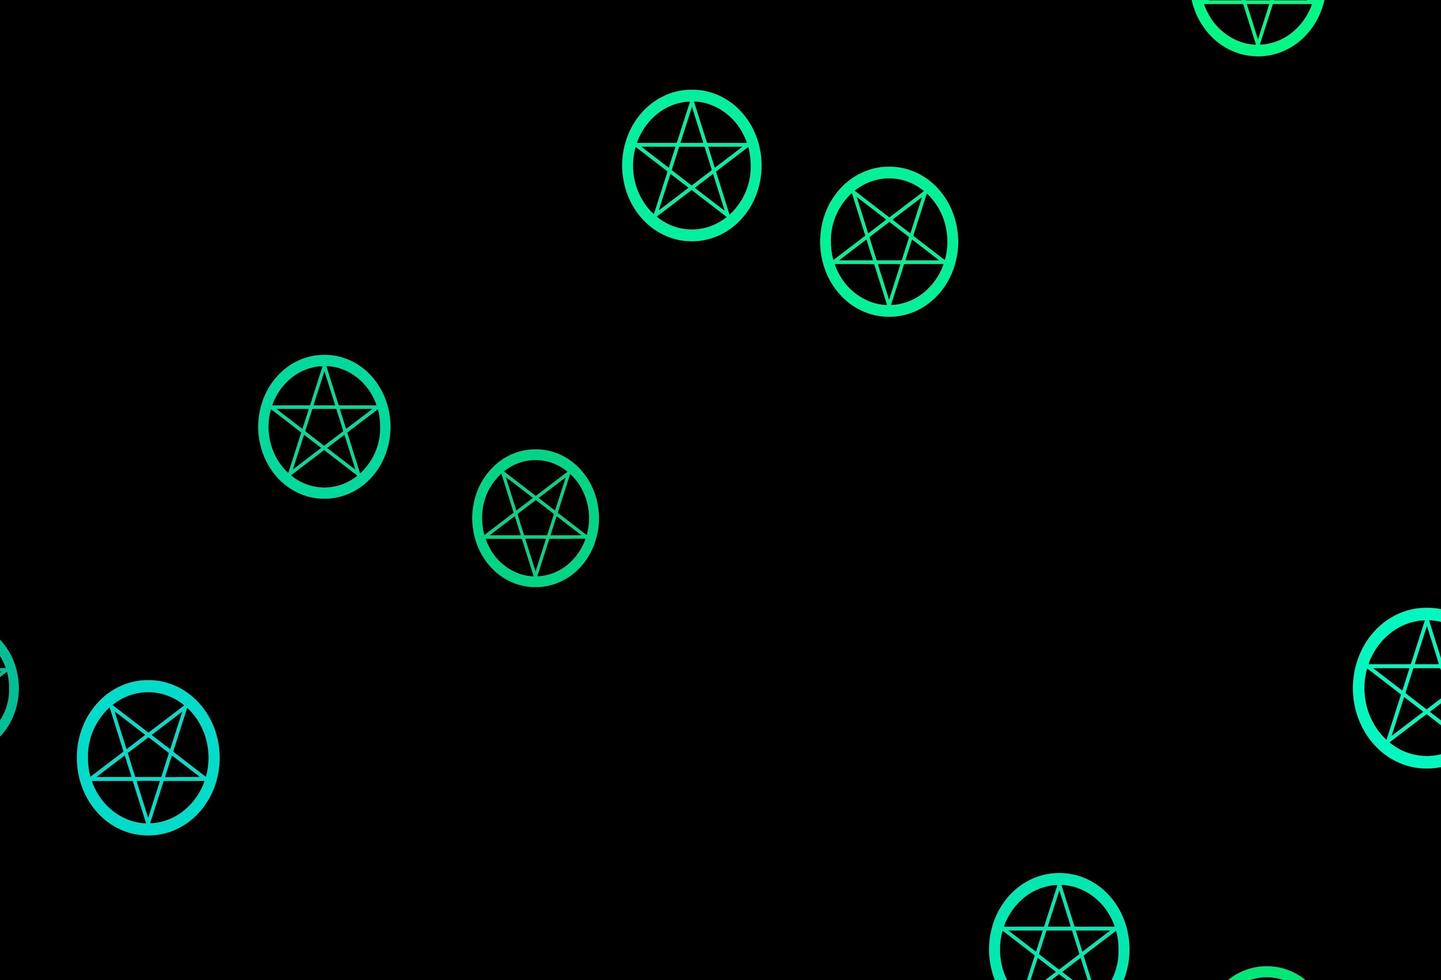 Dark Green vector background with occult symbols.